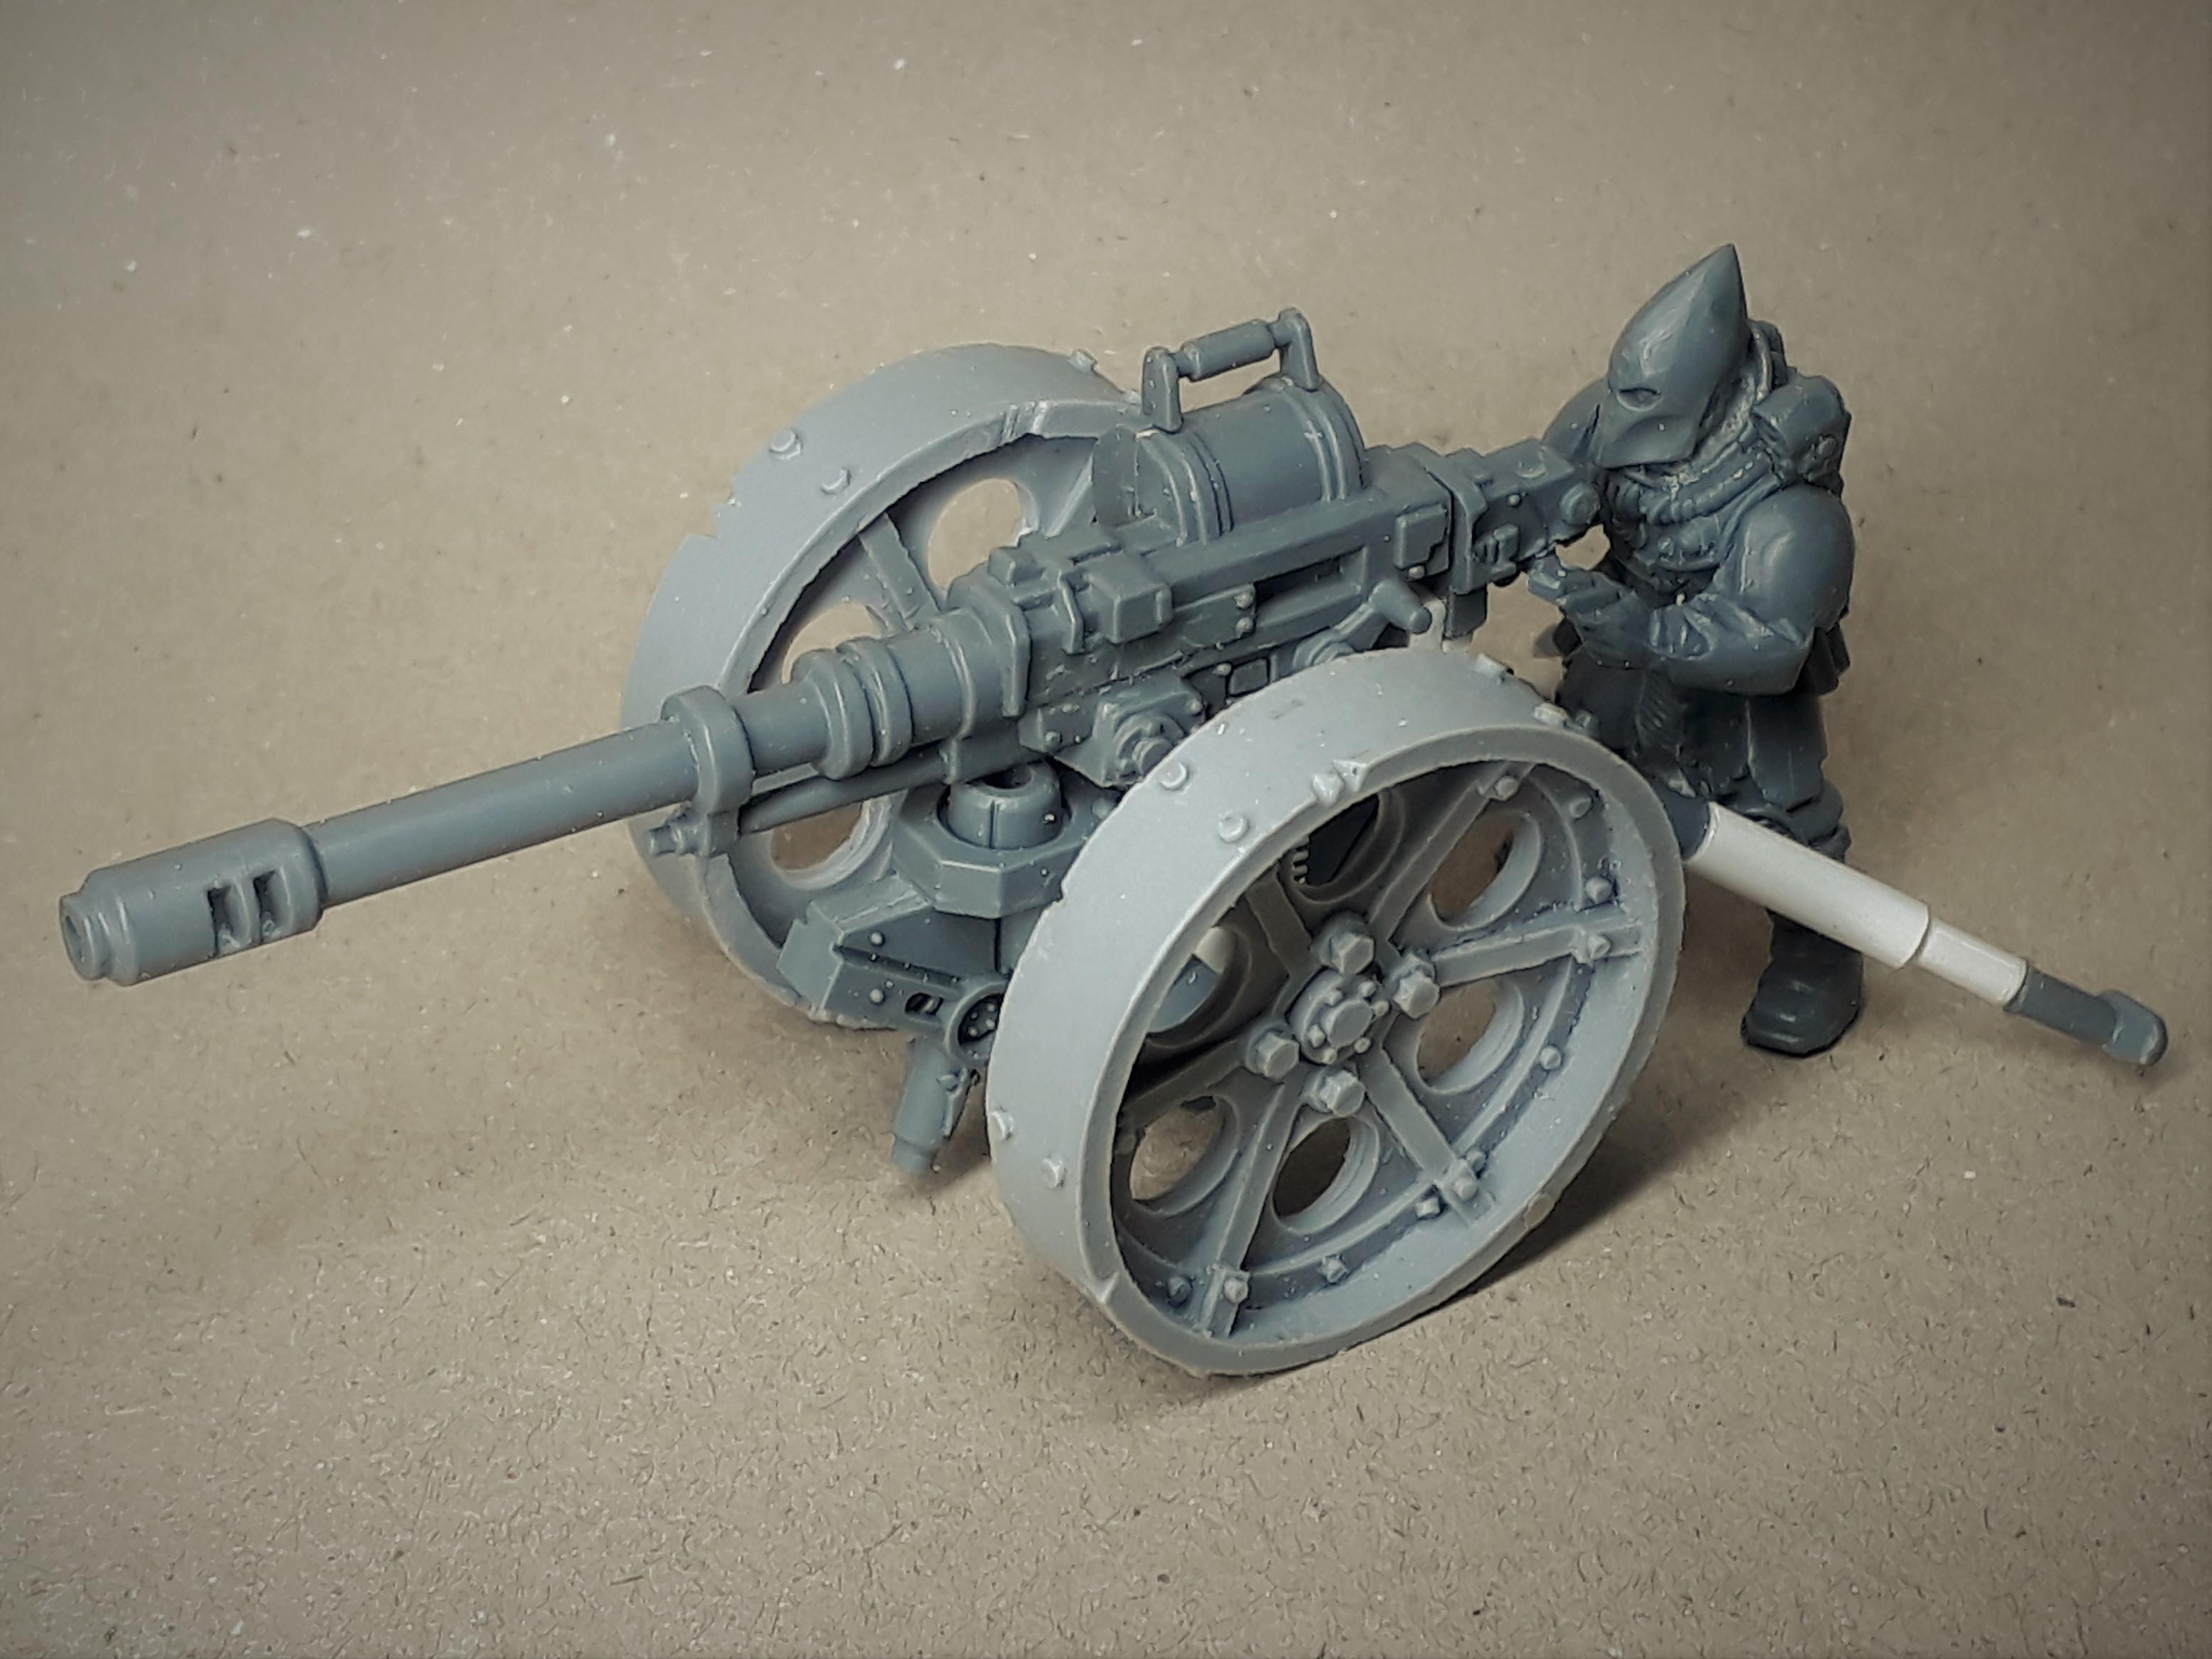 Artillery, Astra Militarum, Autocannon, Cayn'spenitents, Conversion, Heavy Weapons Team, Heavyweaponsteam, Imperial Guard, Infantry, Lascannon, Warhammer 40,000